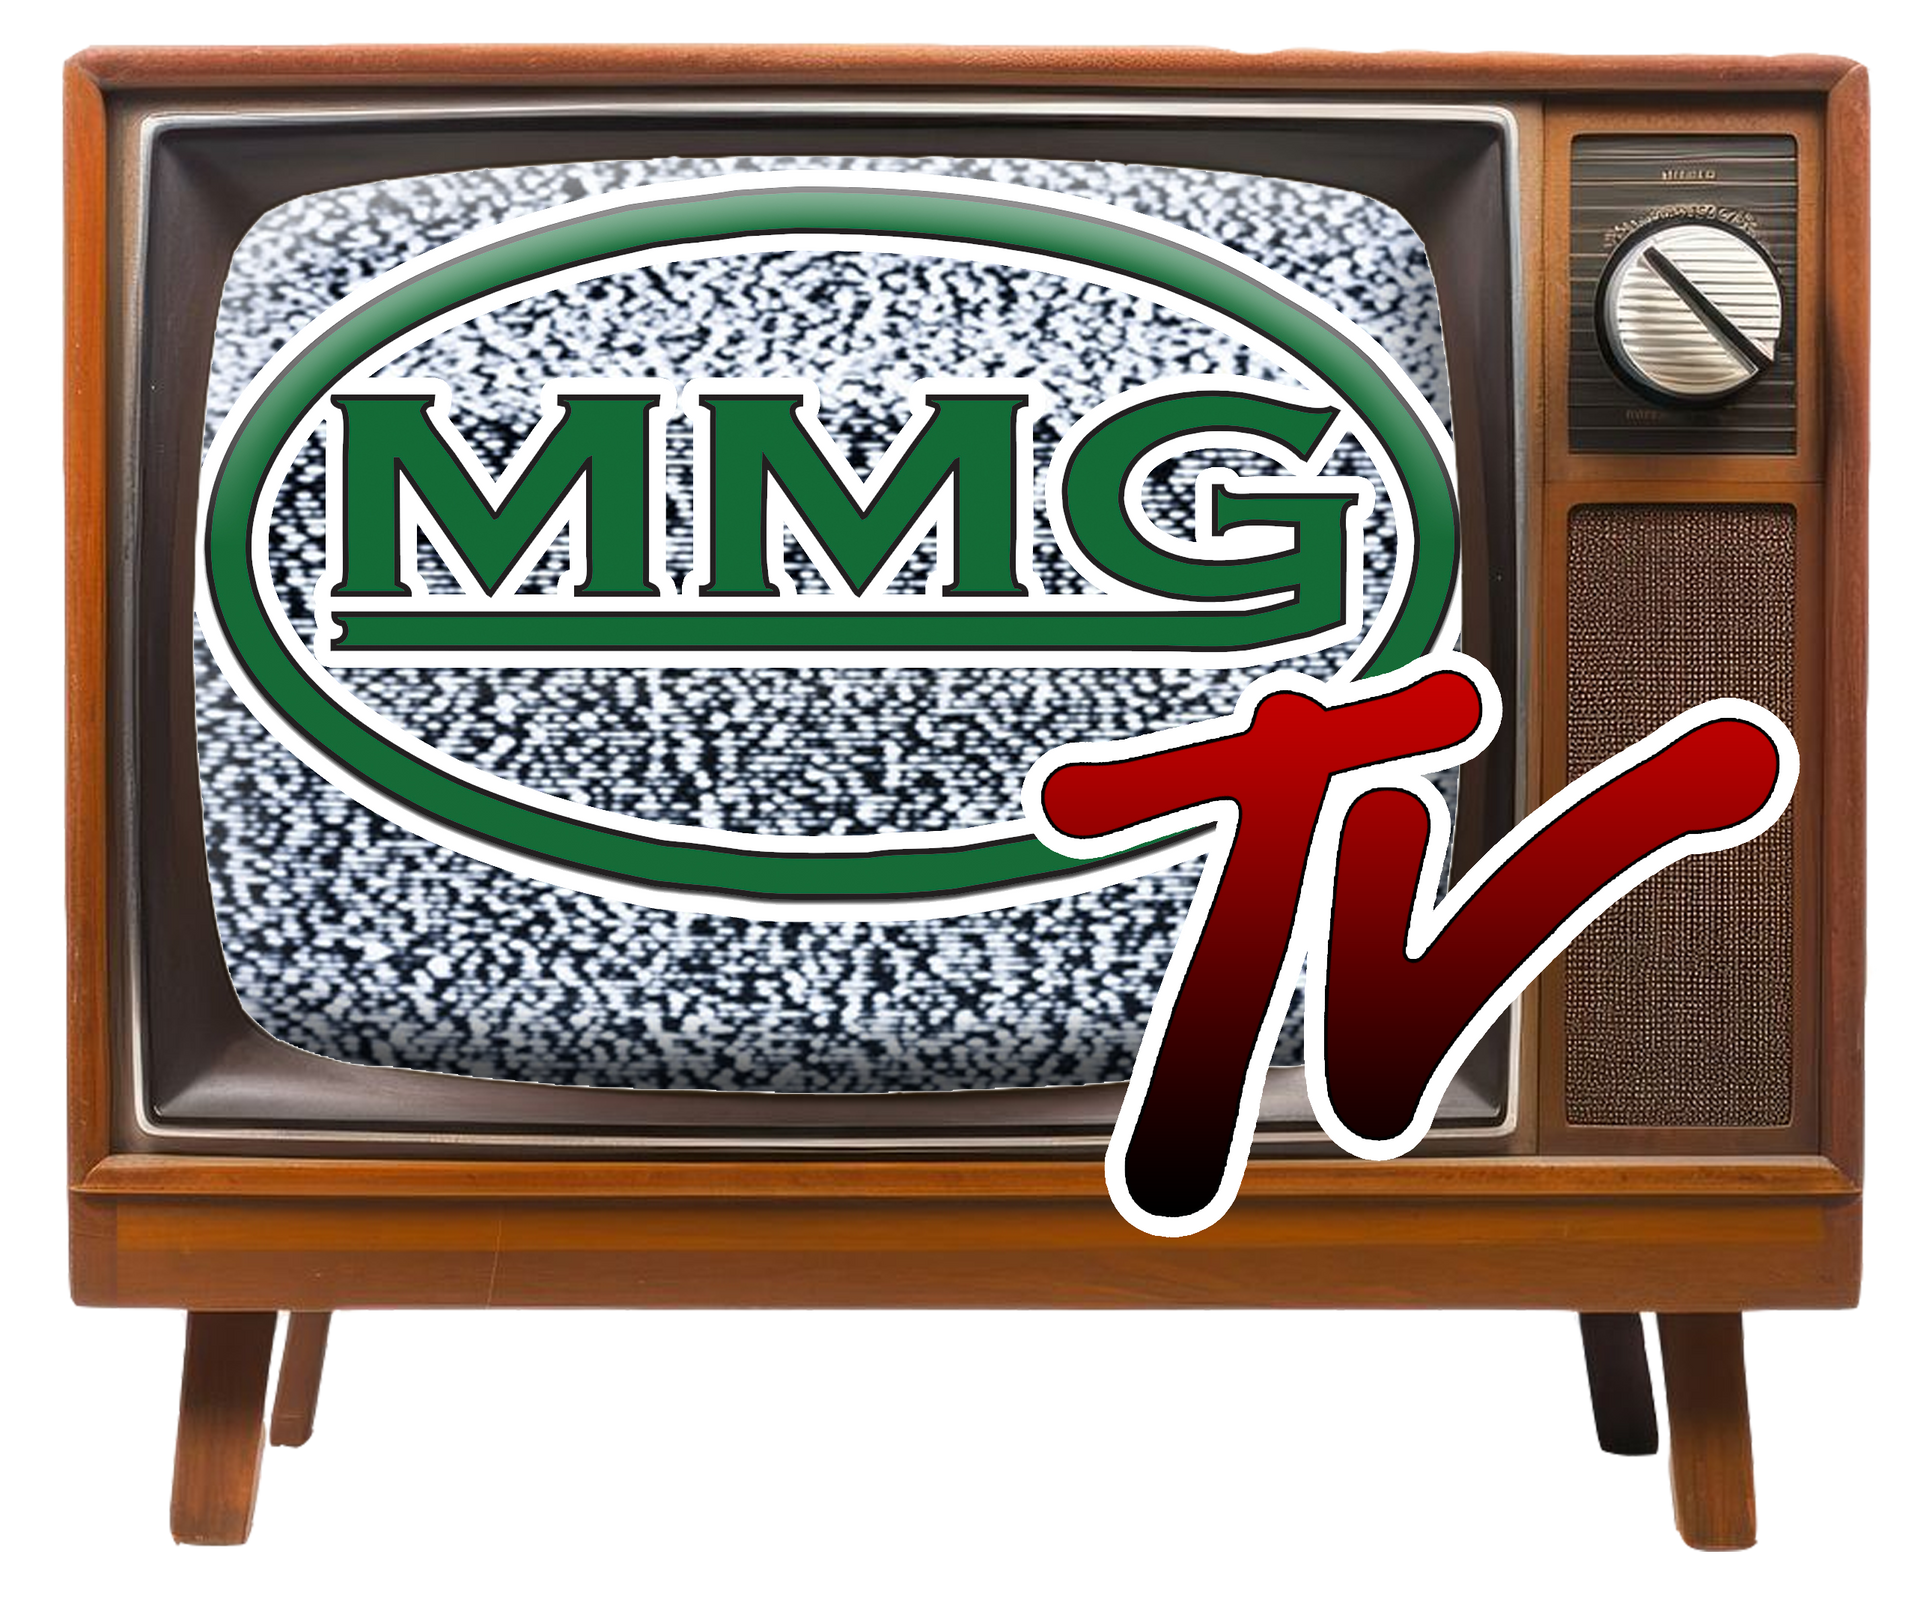 An old television with the logo for mmg tv on it